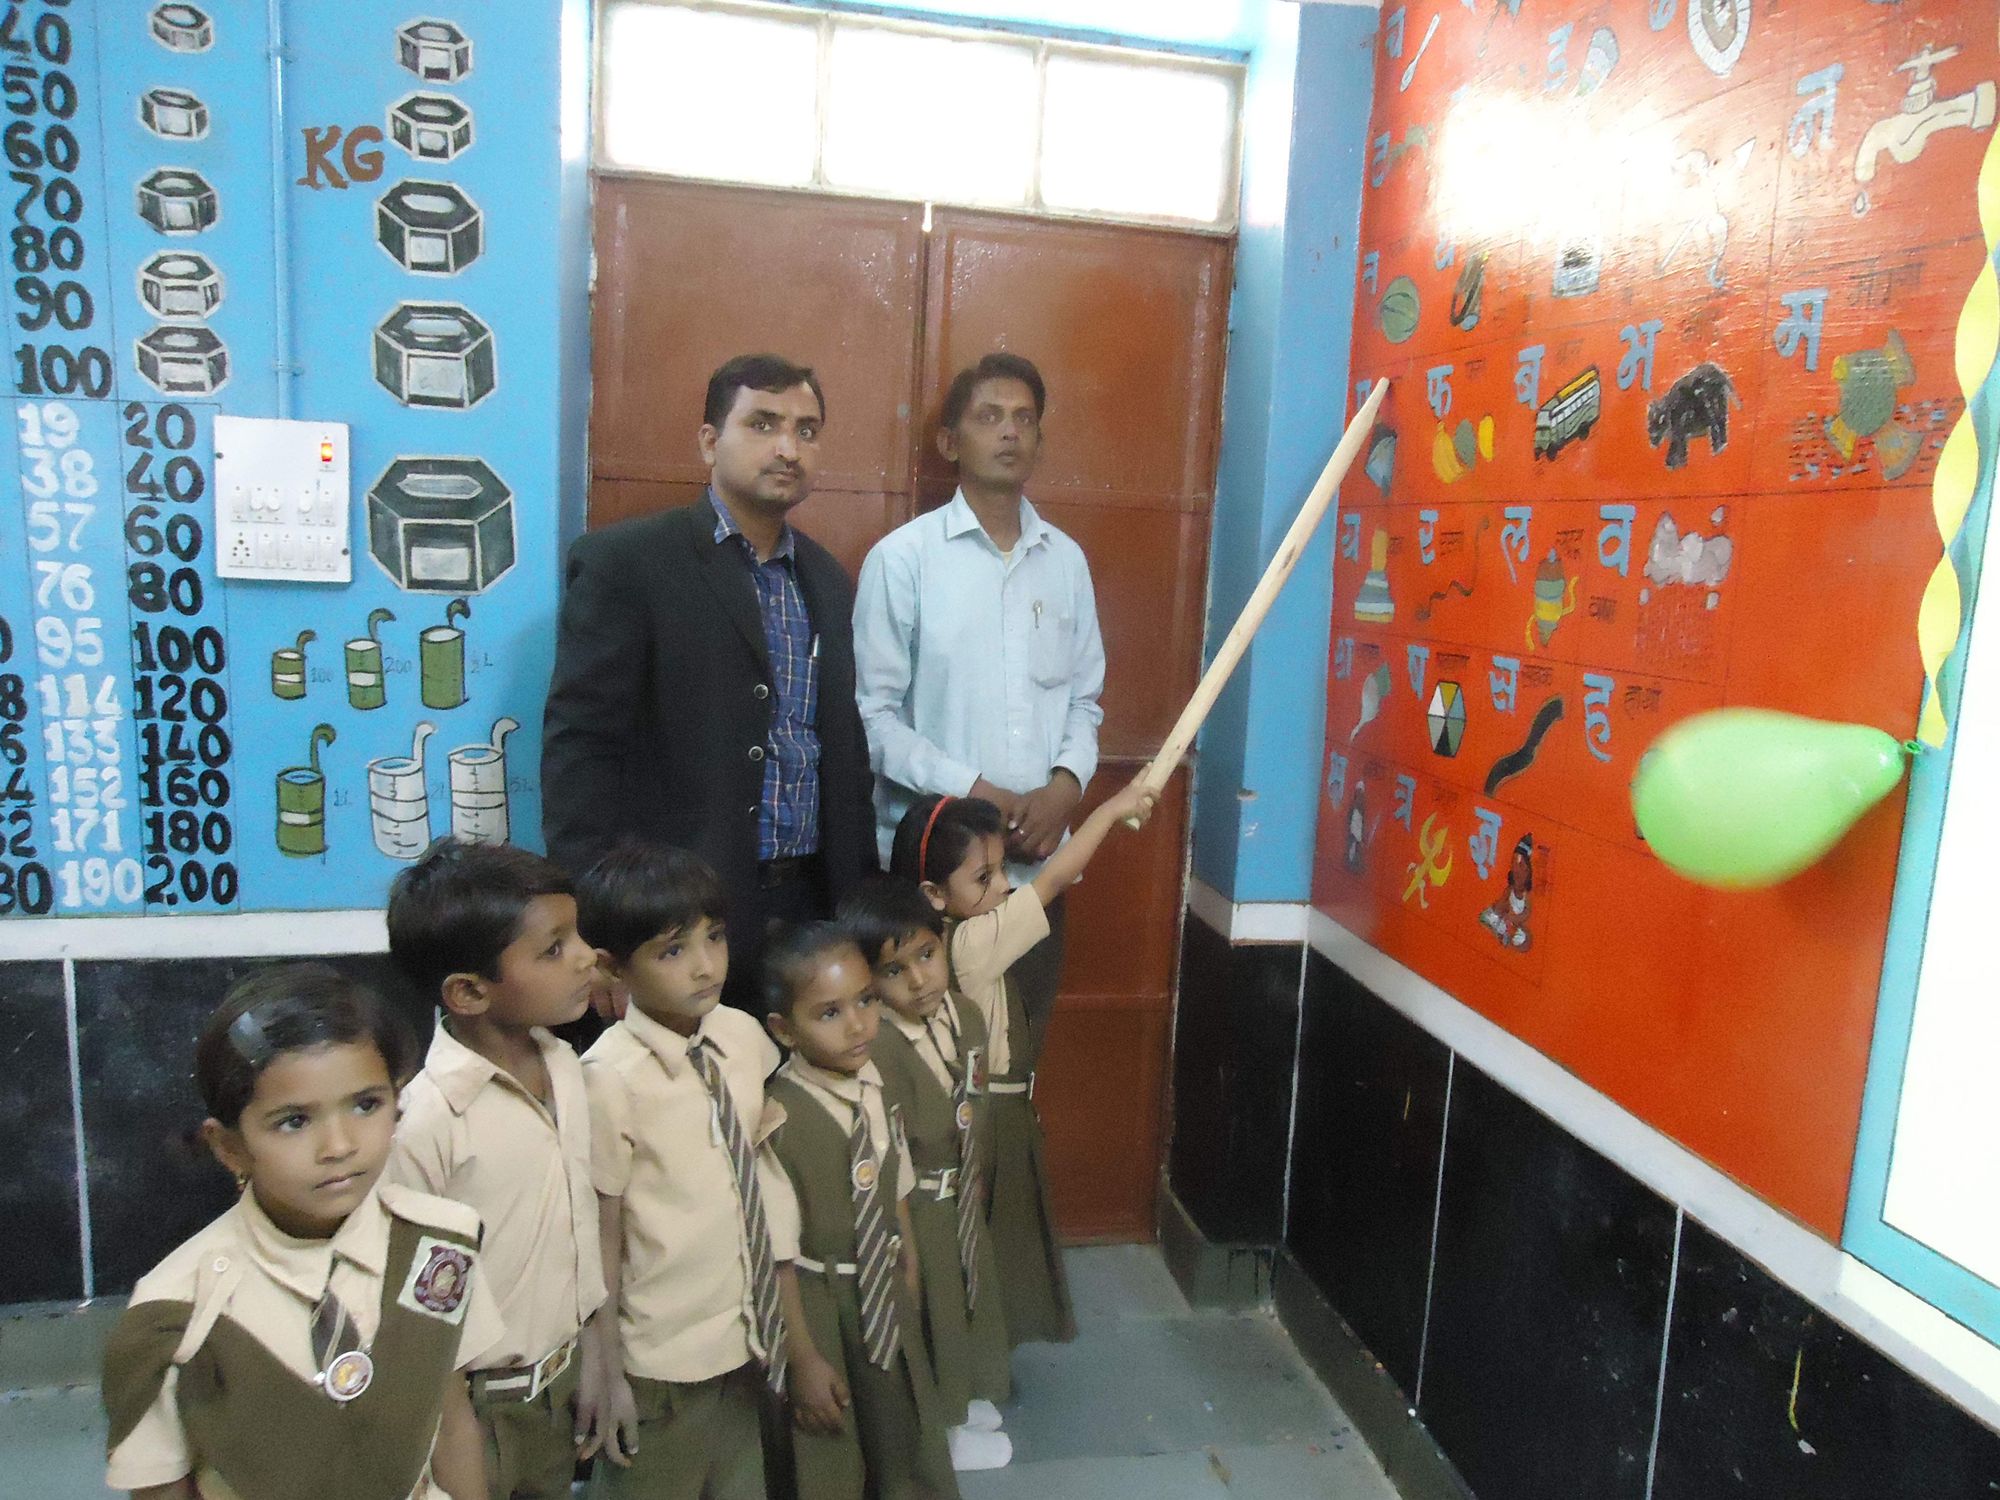 Primary students will get modern education in nagaur